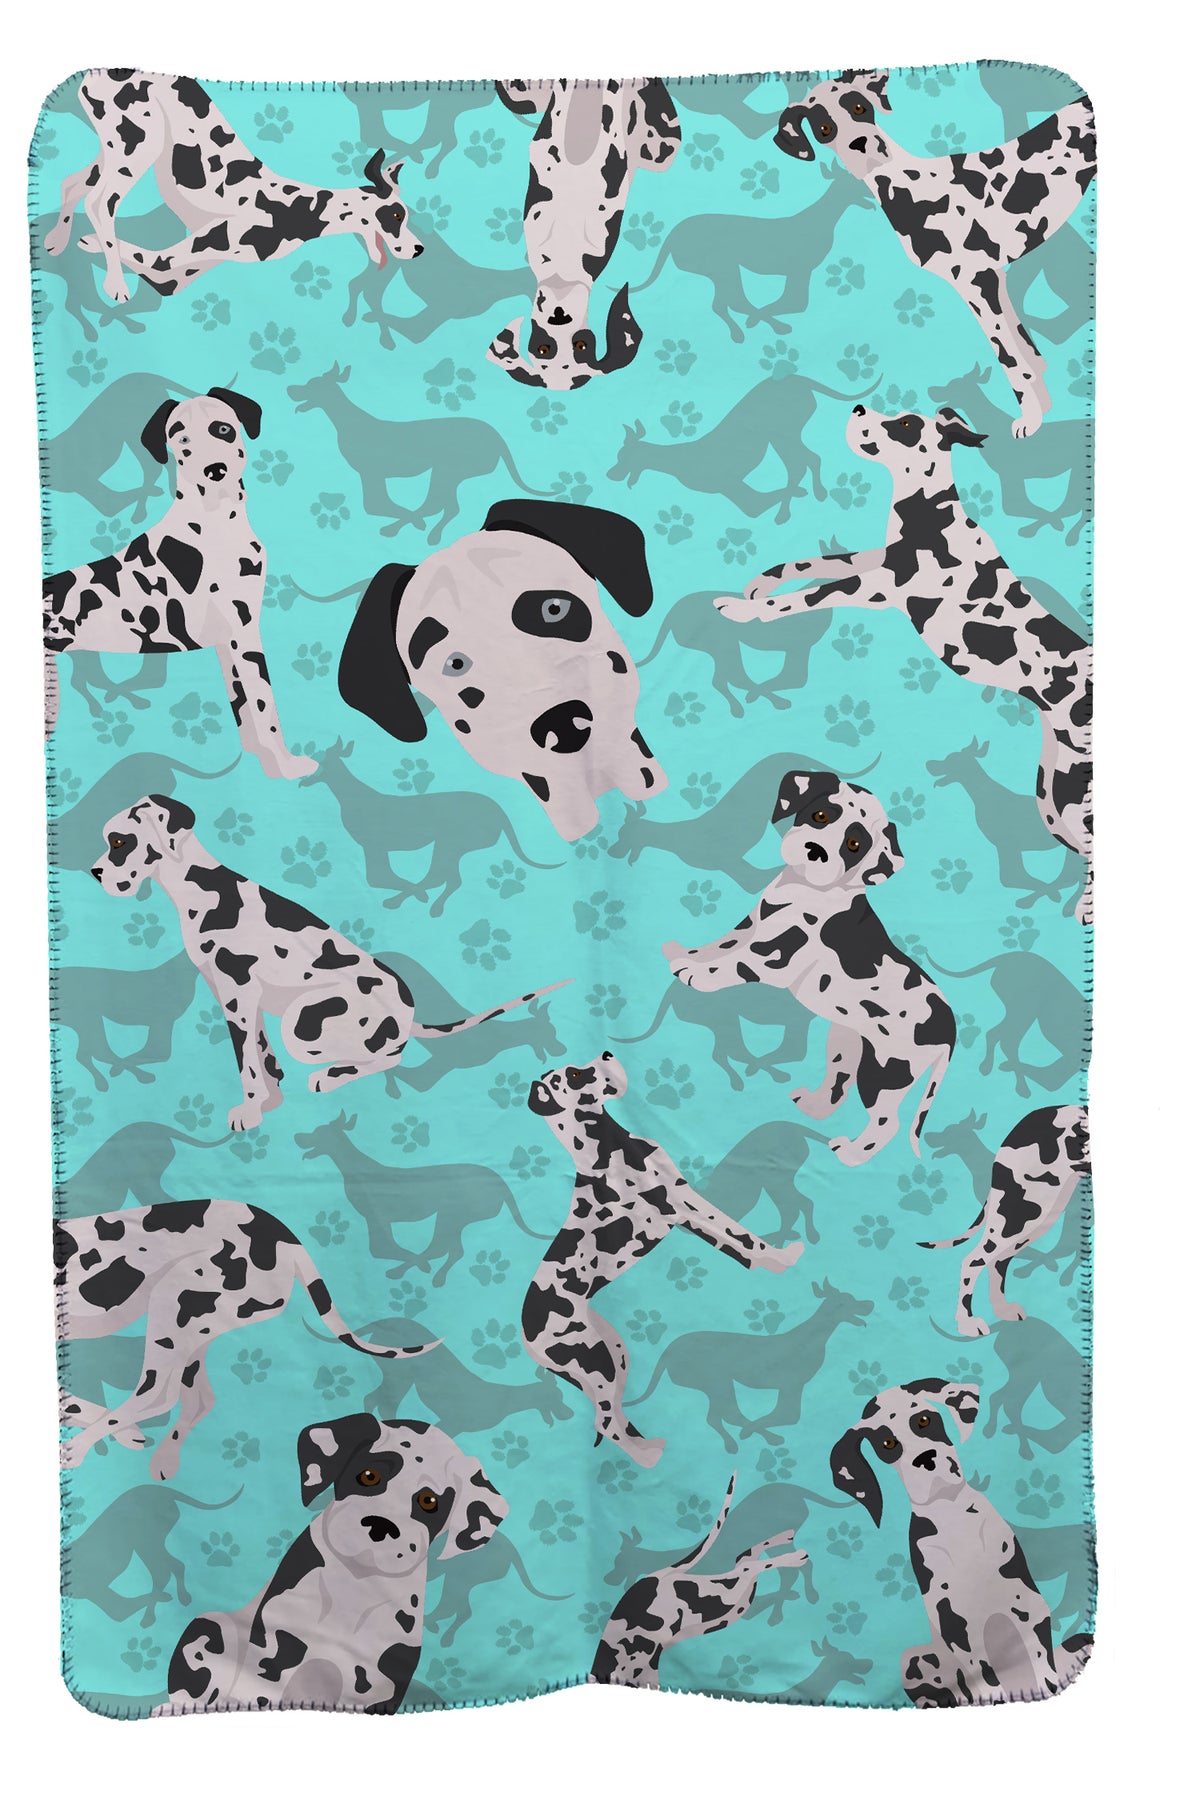 Buy this Harlequin Natural Ears Great Dane Soft Travel Blanket with Bag